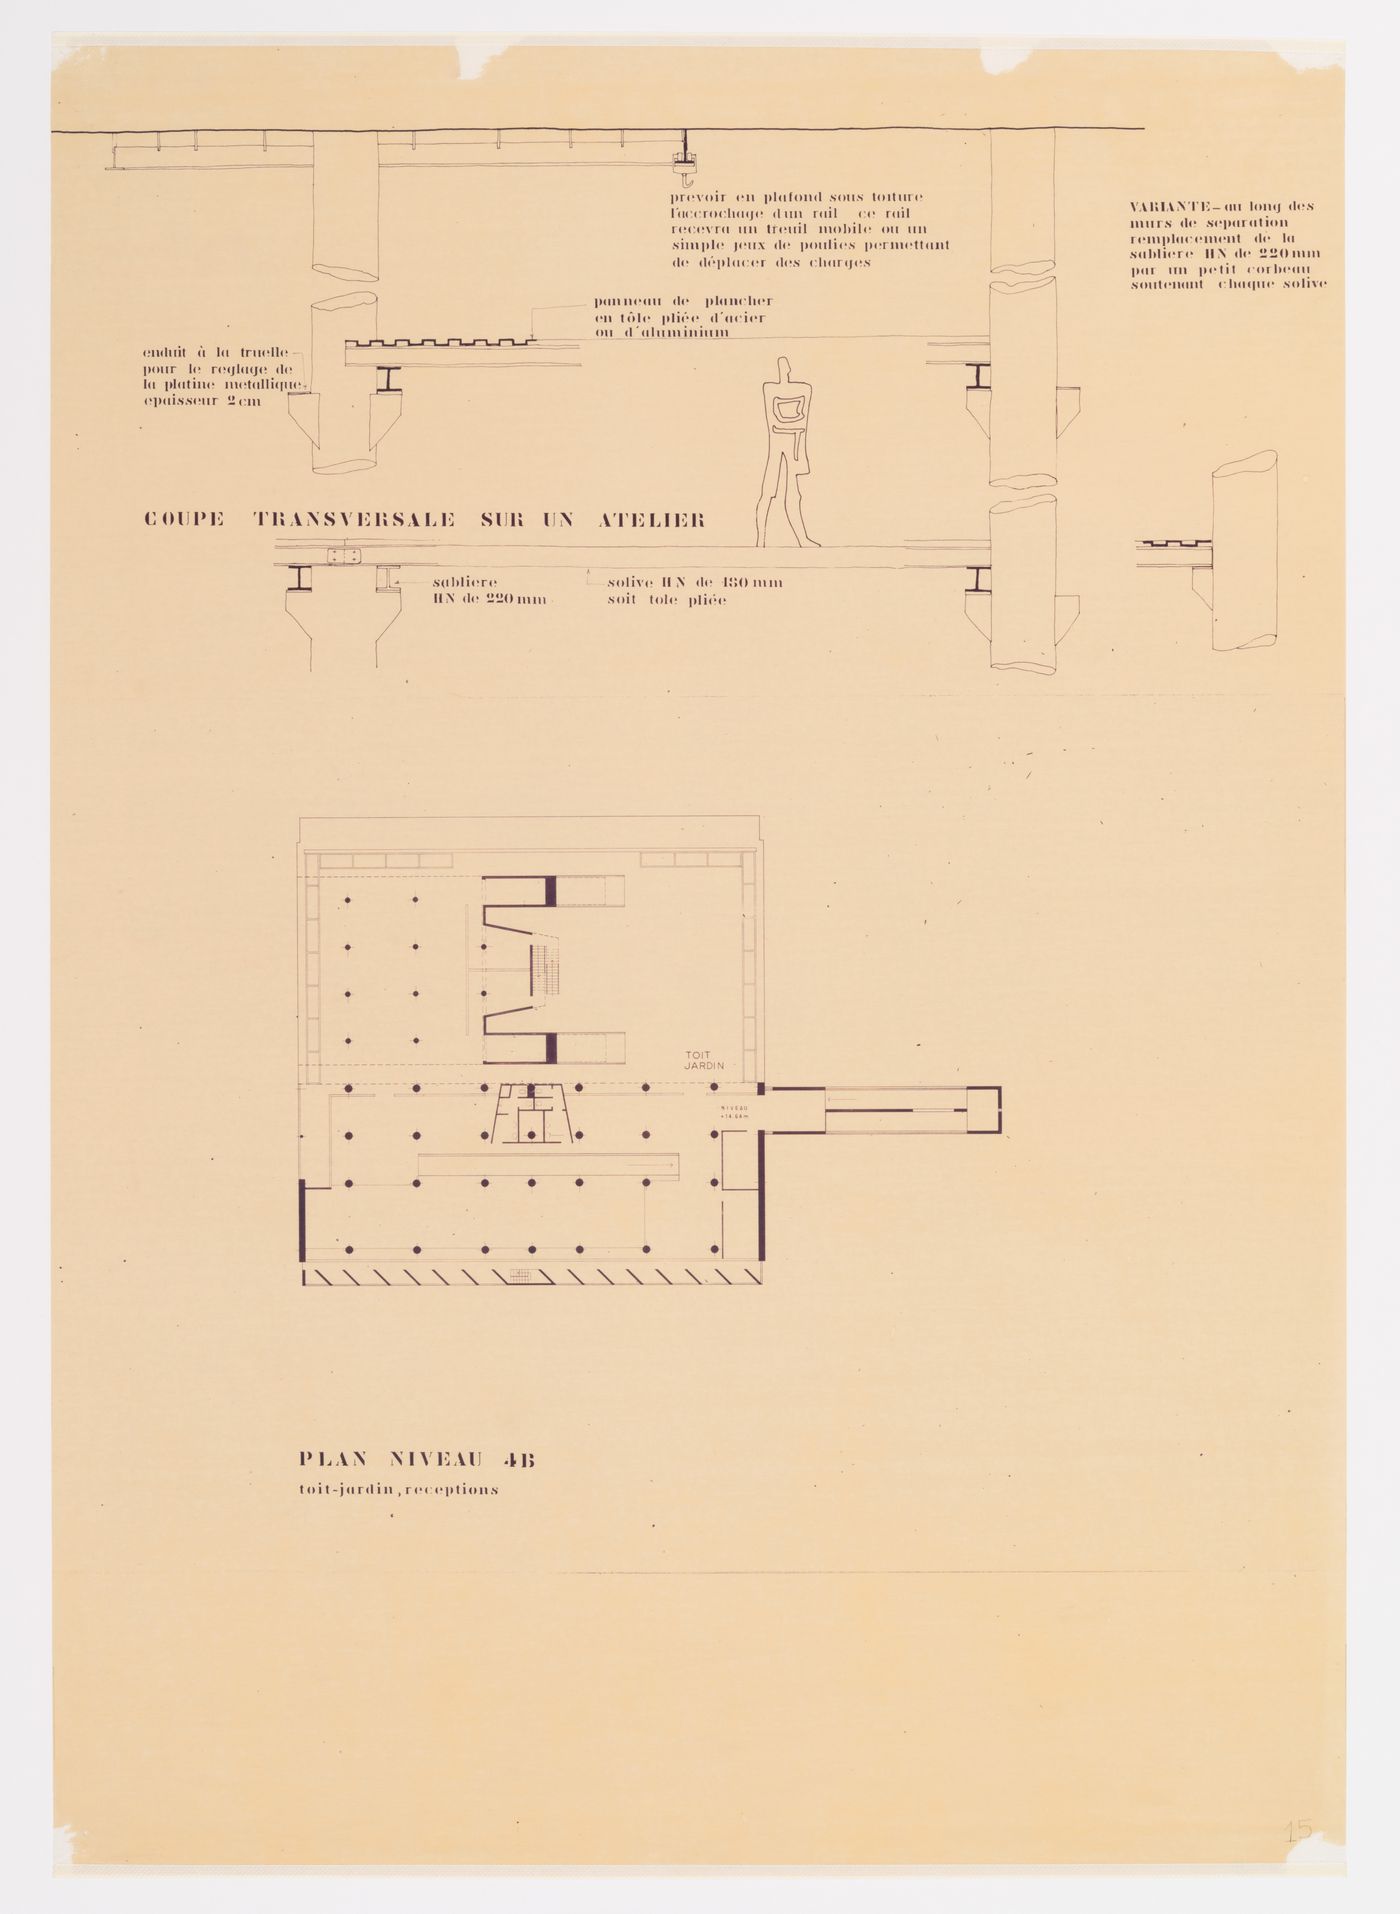 Presentation drawing for the Museum of Knowledge, Sector 1, in Chandigarh, India